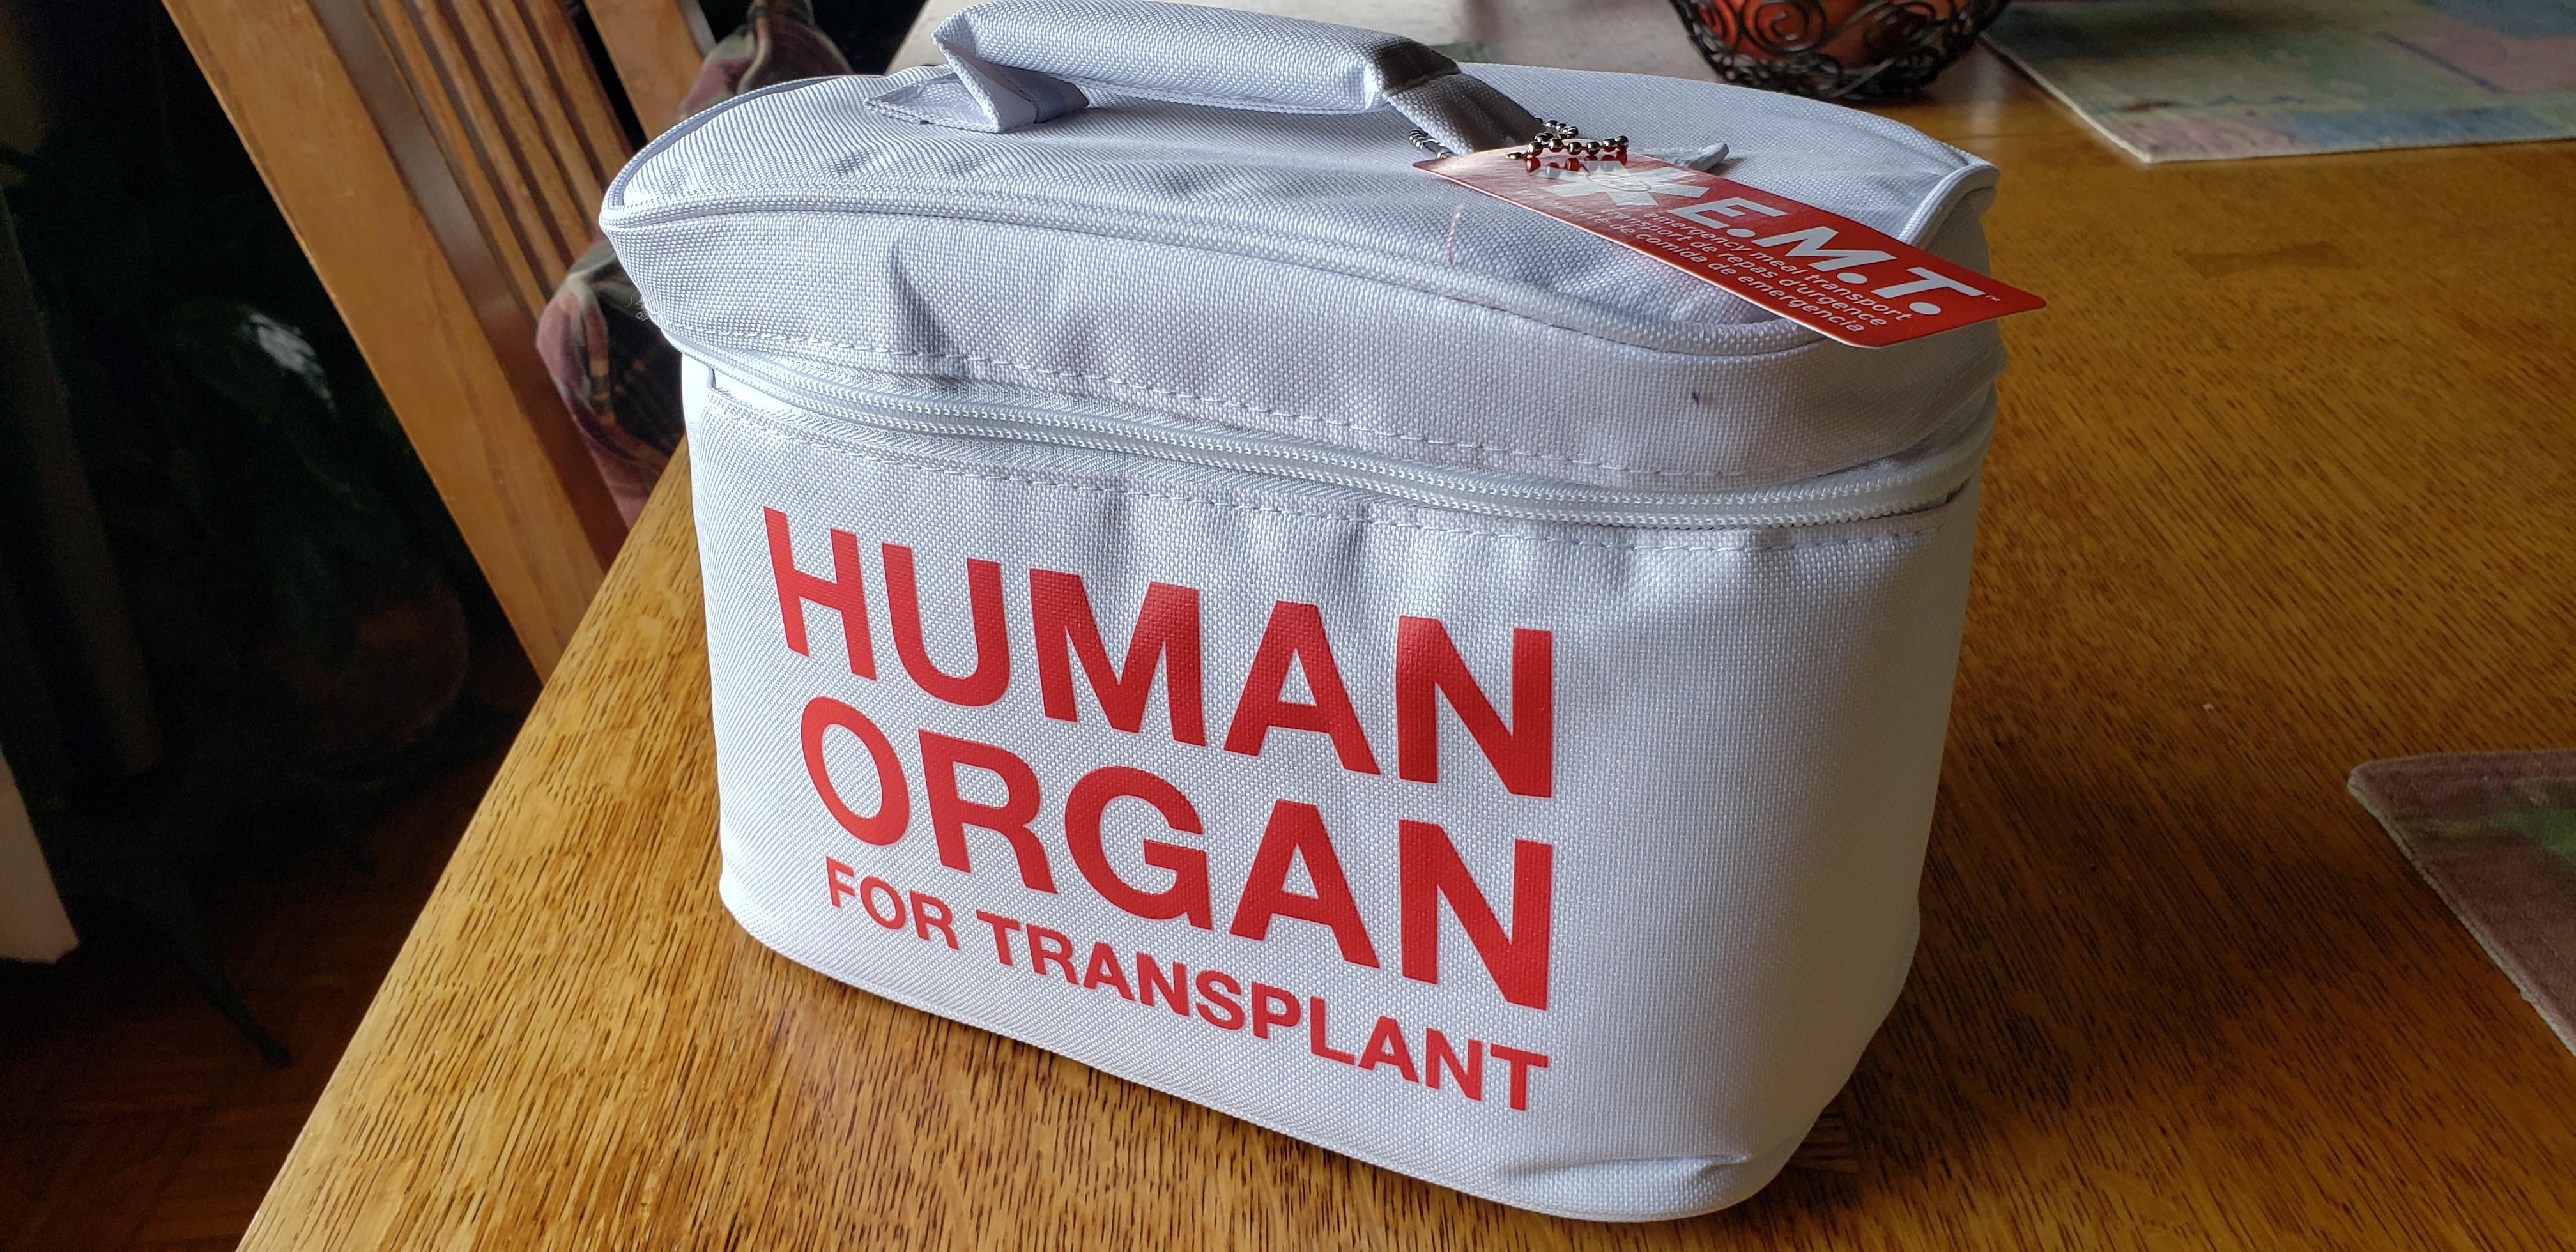 The new lunch box I got for Christmas.